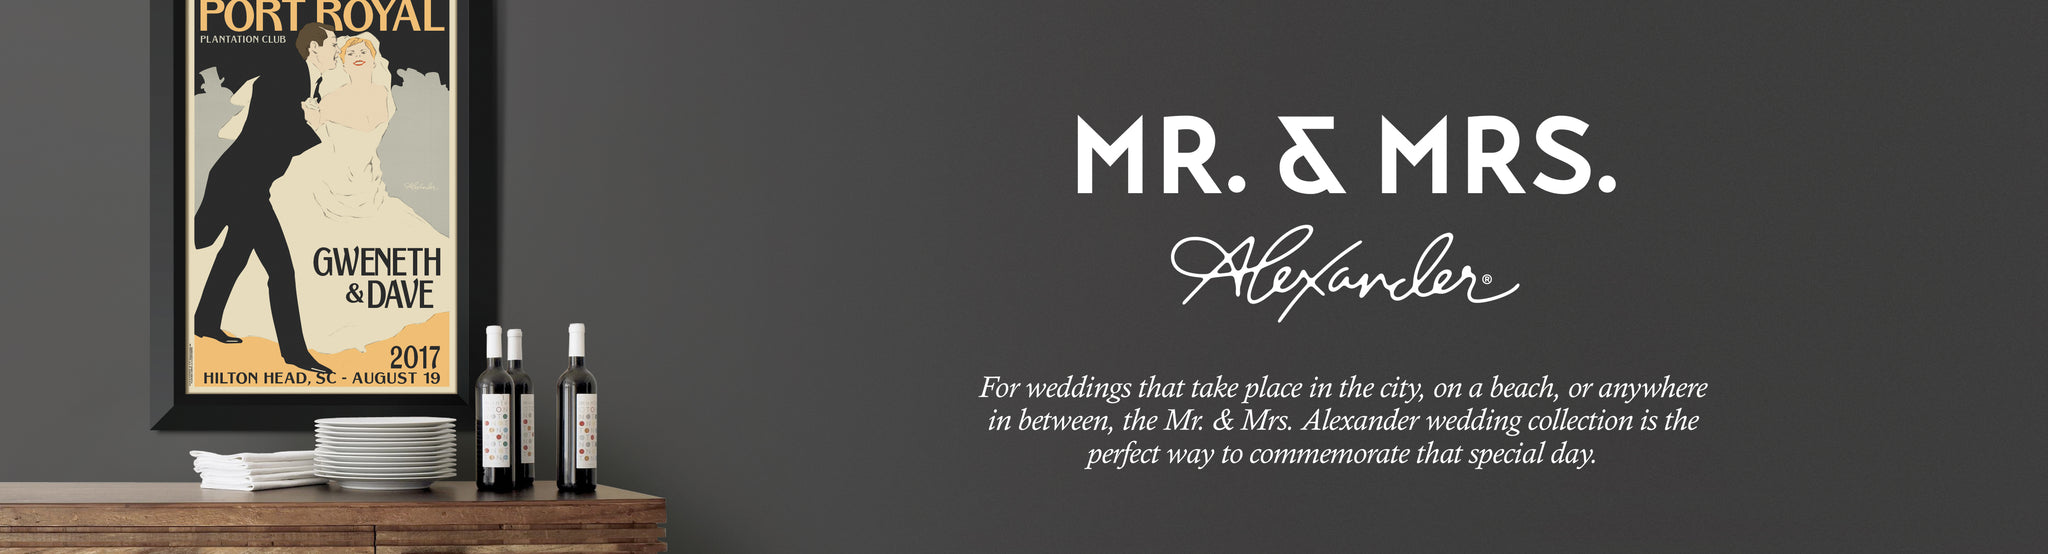 For weddings that took place in the city, on a beach, or anywhere in between, personalized artwork from the Mr & Mrs Alexander wedding collection is the perfect anniversary gift.